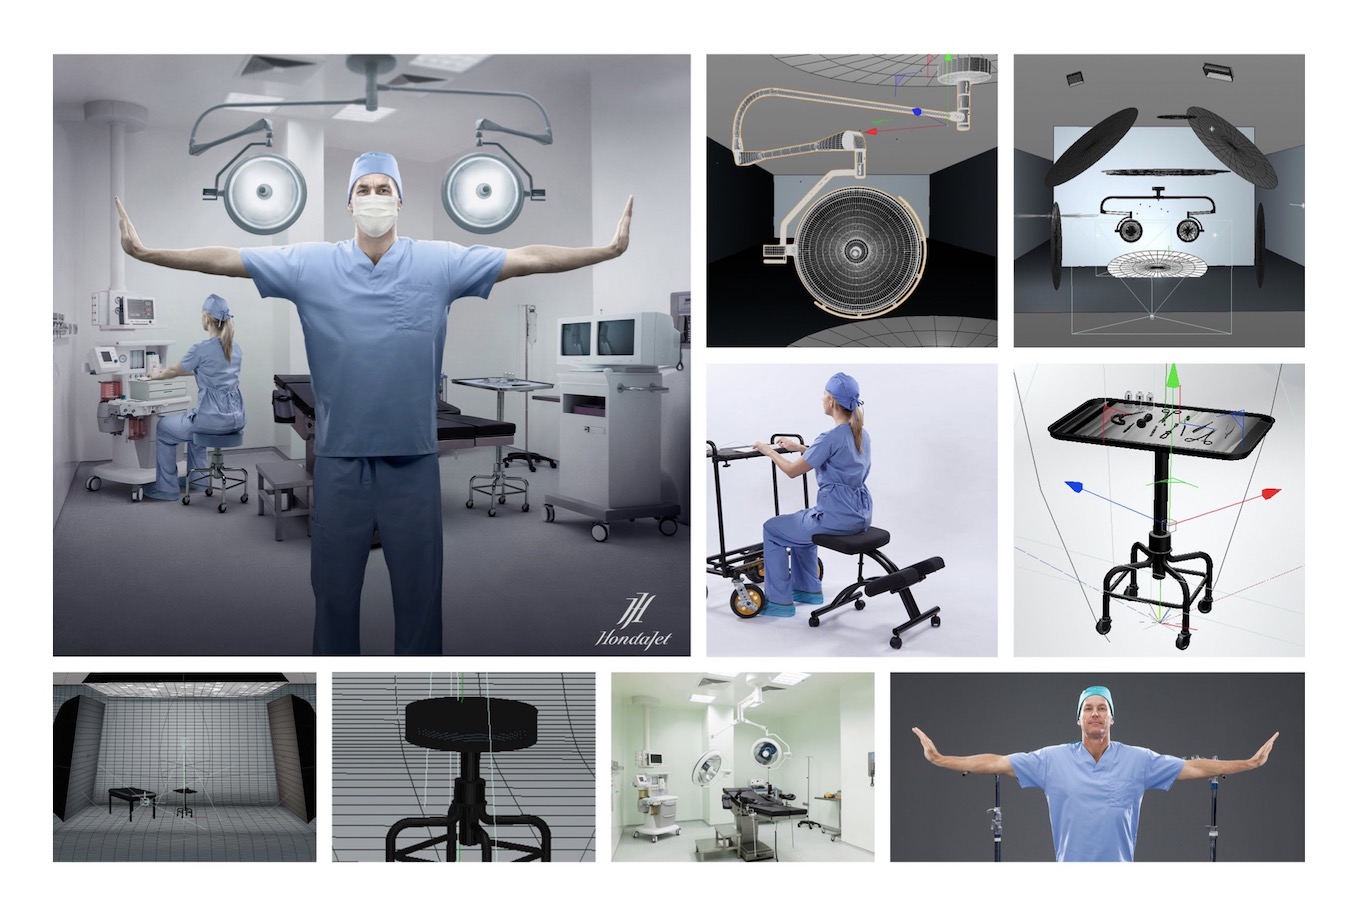 Tiled images demonstrating CGI enhancement process to advertising photo of masked surgeon in light blue scrubs, standing arms outstretched (east to west) in operating room, by Atlanta-based conceptual photographer John Fulton.